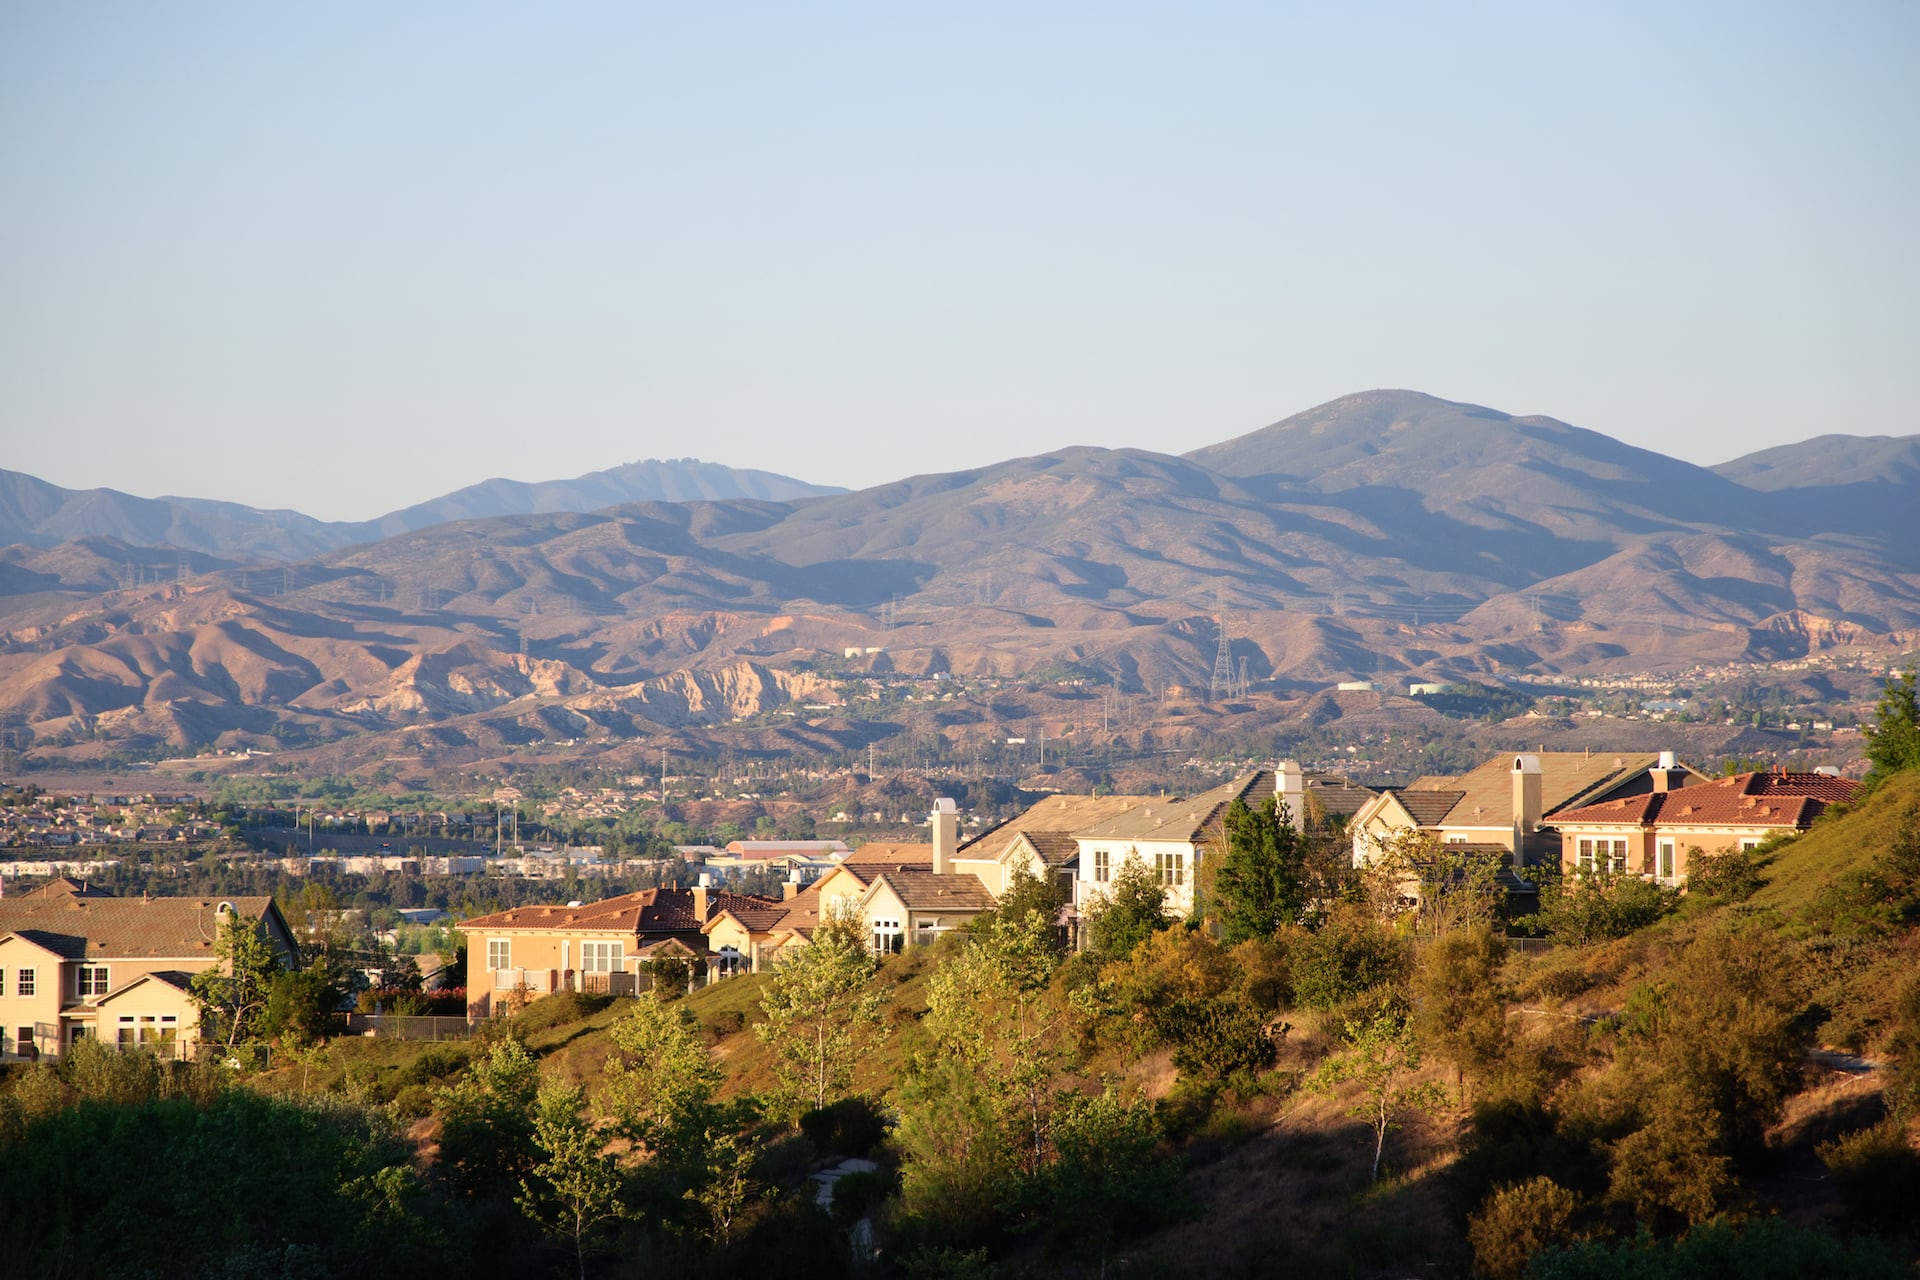 View of houses with mountains behind in Santa Clarita, California